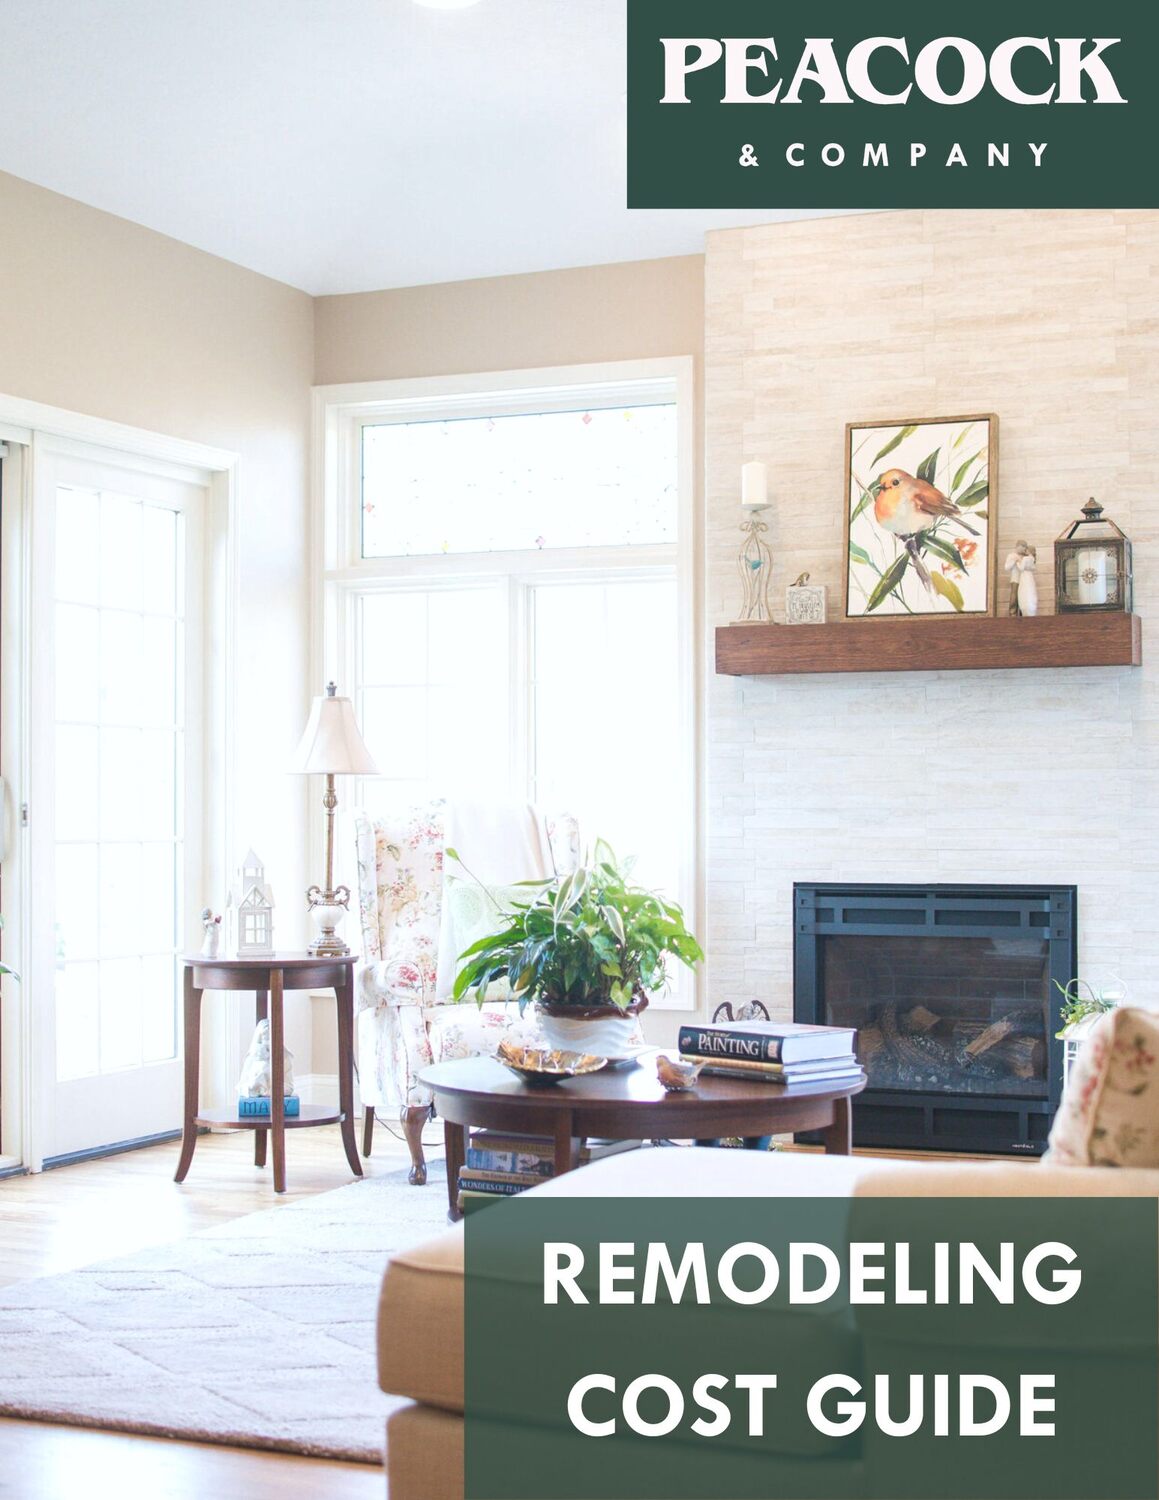 Peacock REMODELING COST GUIDE Facts & Figures for South Bend, Indiana (1)-1